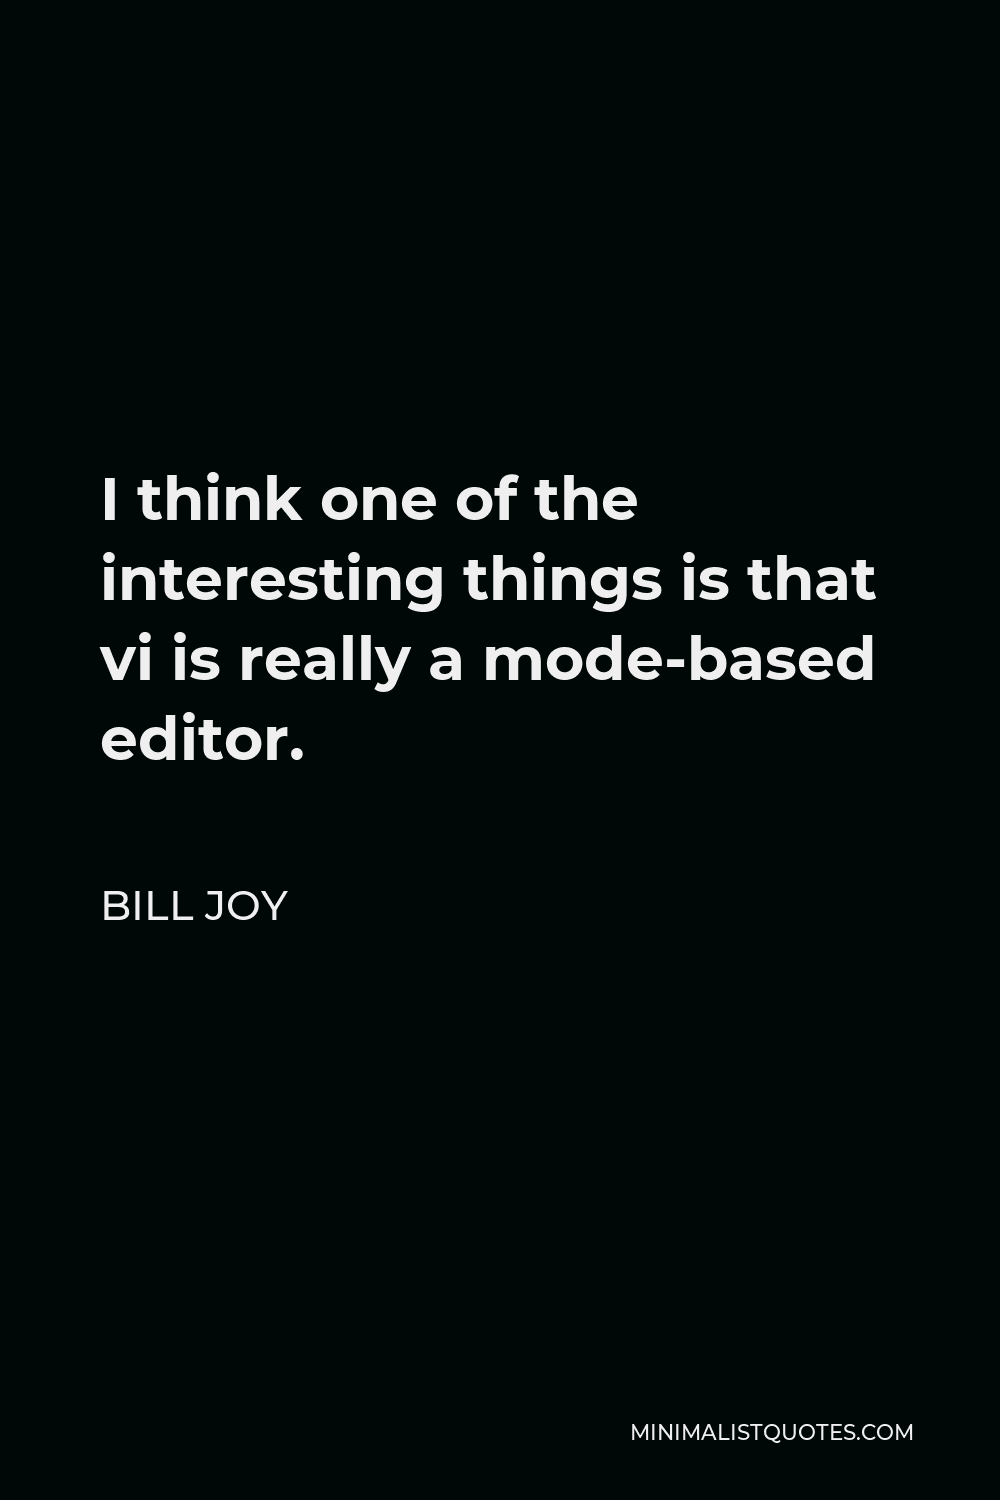 Bill Joy Quote - I think one of the interesting things is that vi is really a mode-based editor.